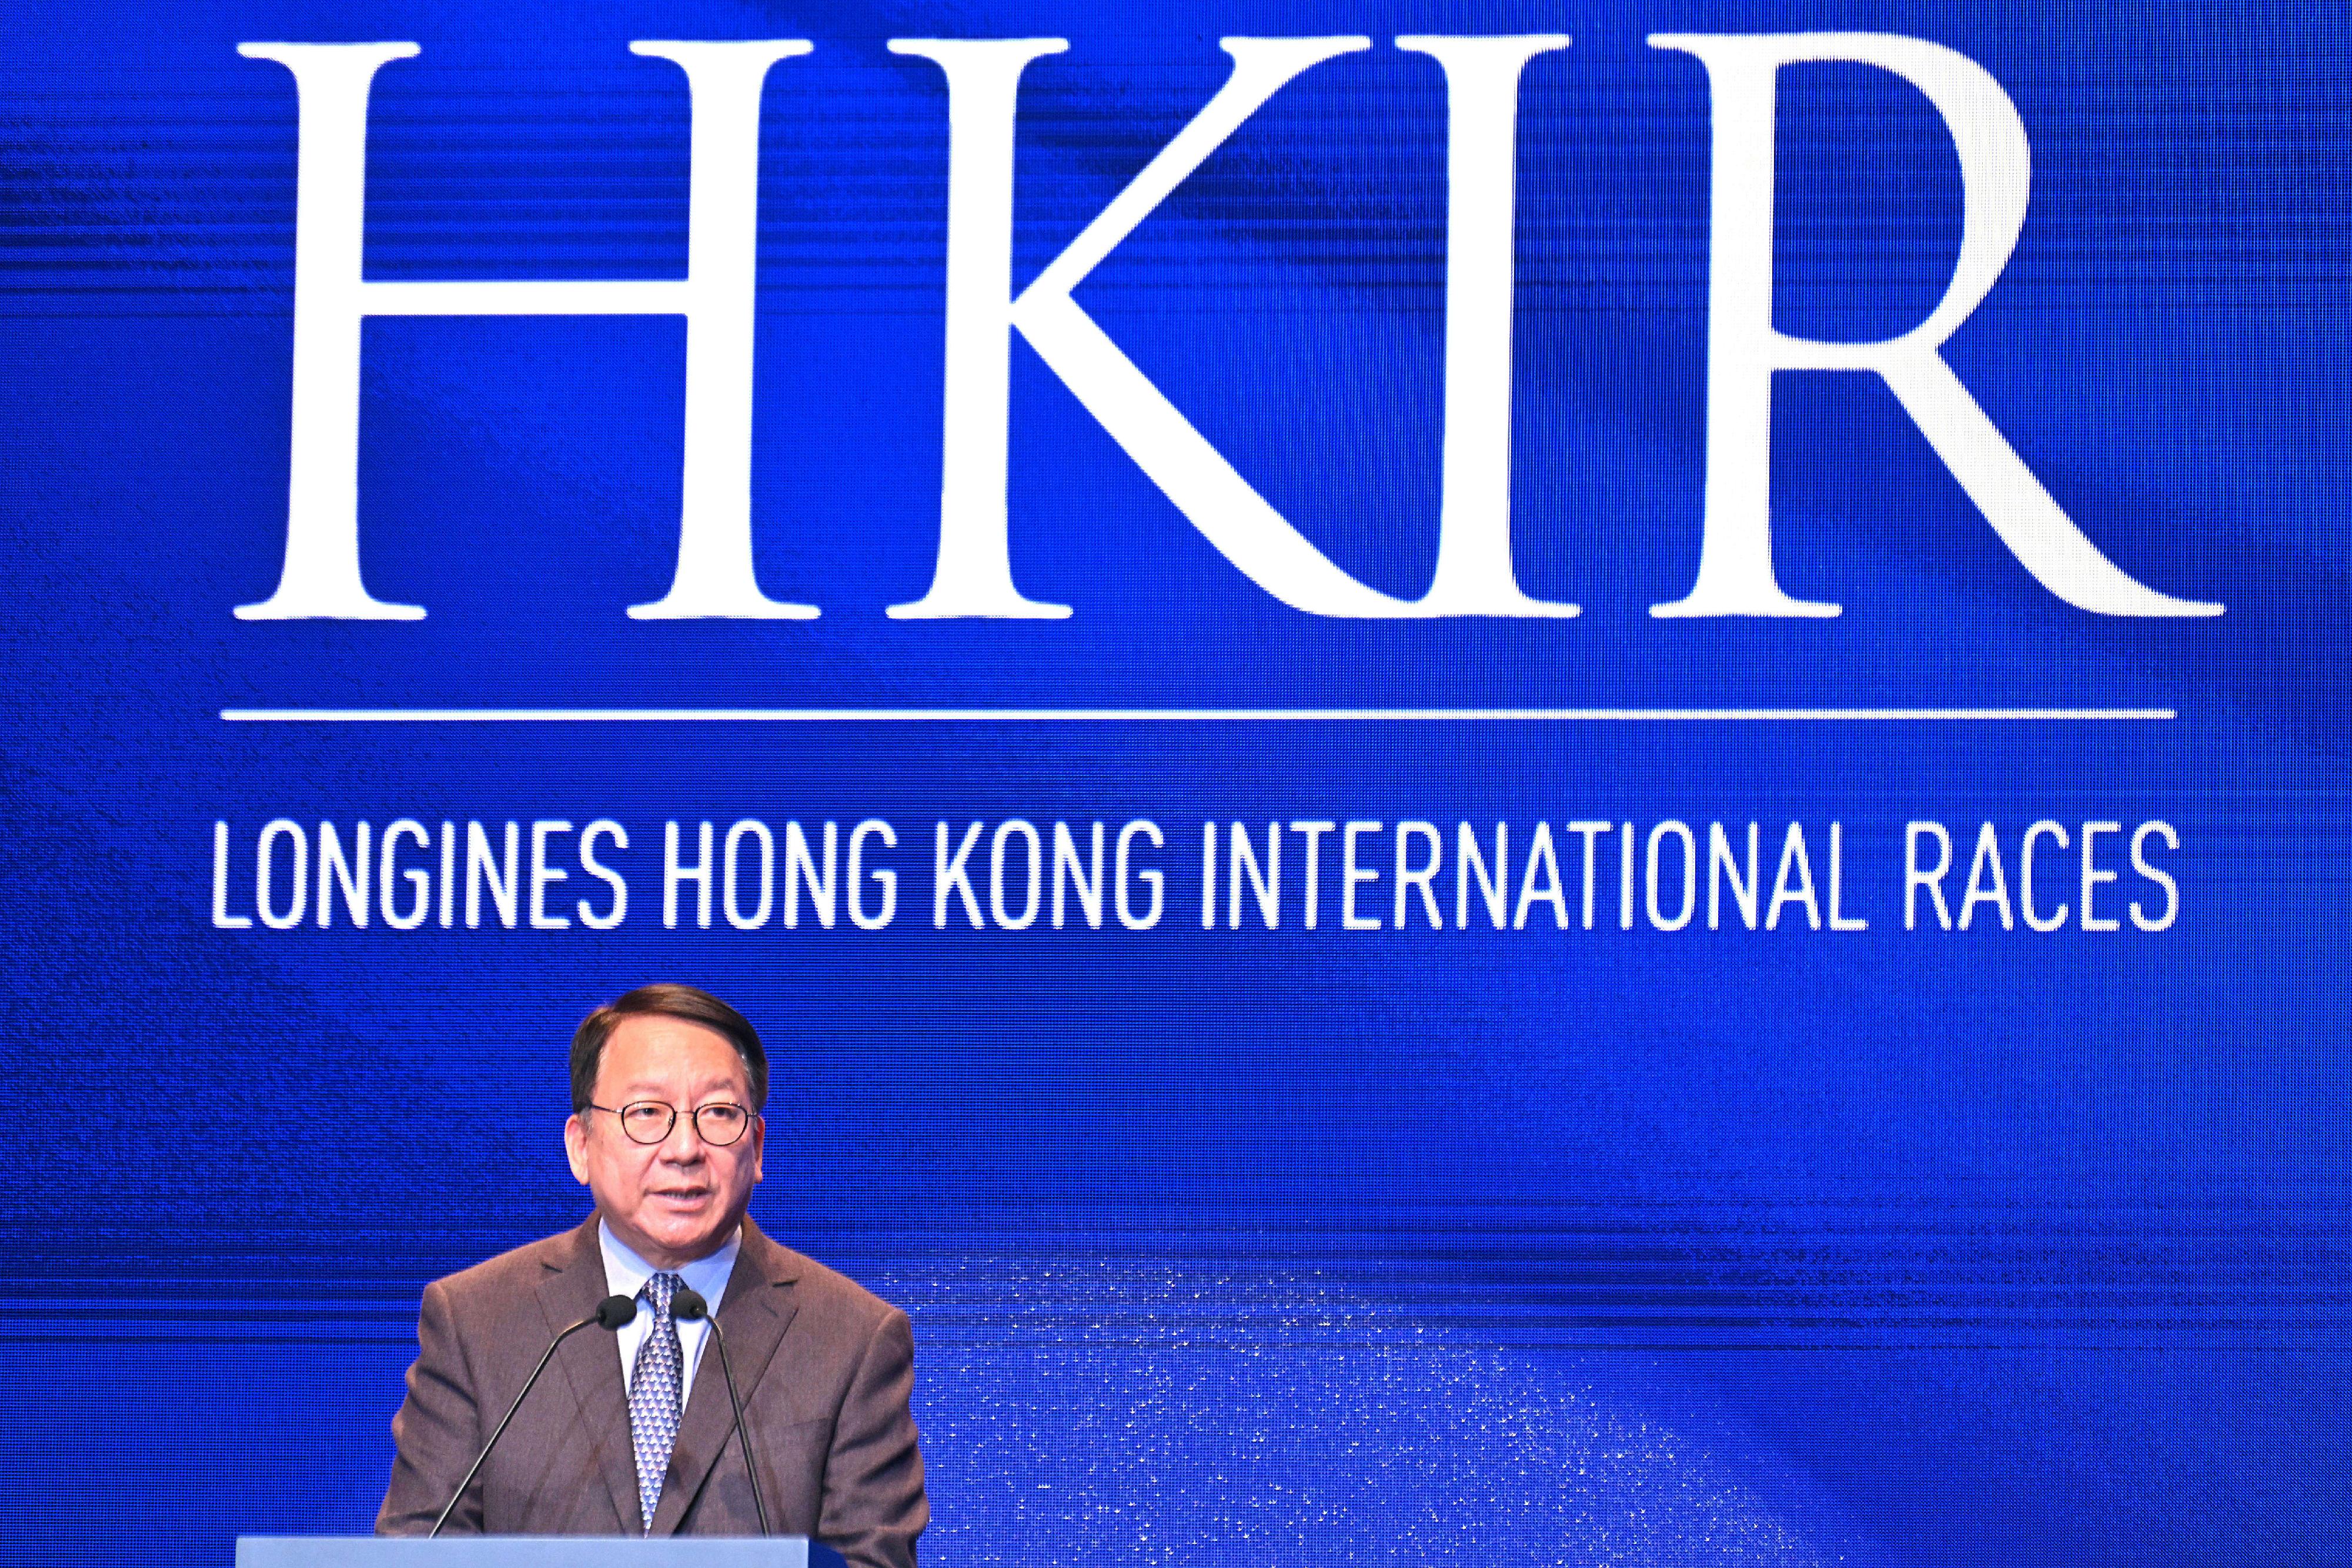 The Chief Secretary for Administration, Mr Chan Kwok-ki, speaks at the LONGINES Hong Kong International Races Gala Dinner today (December 9).